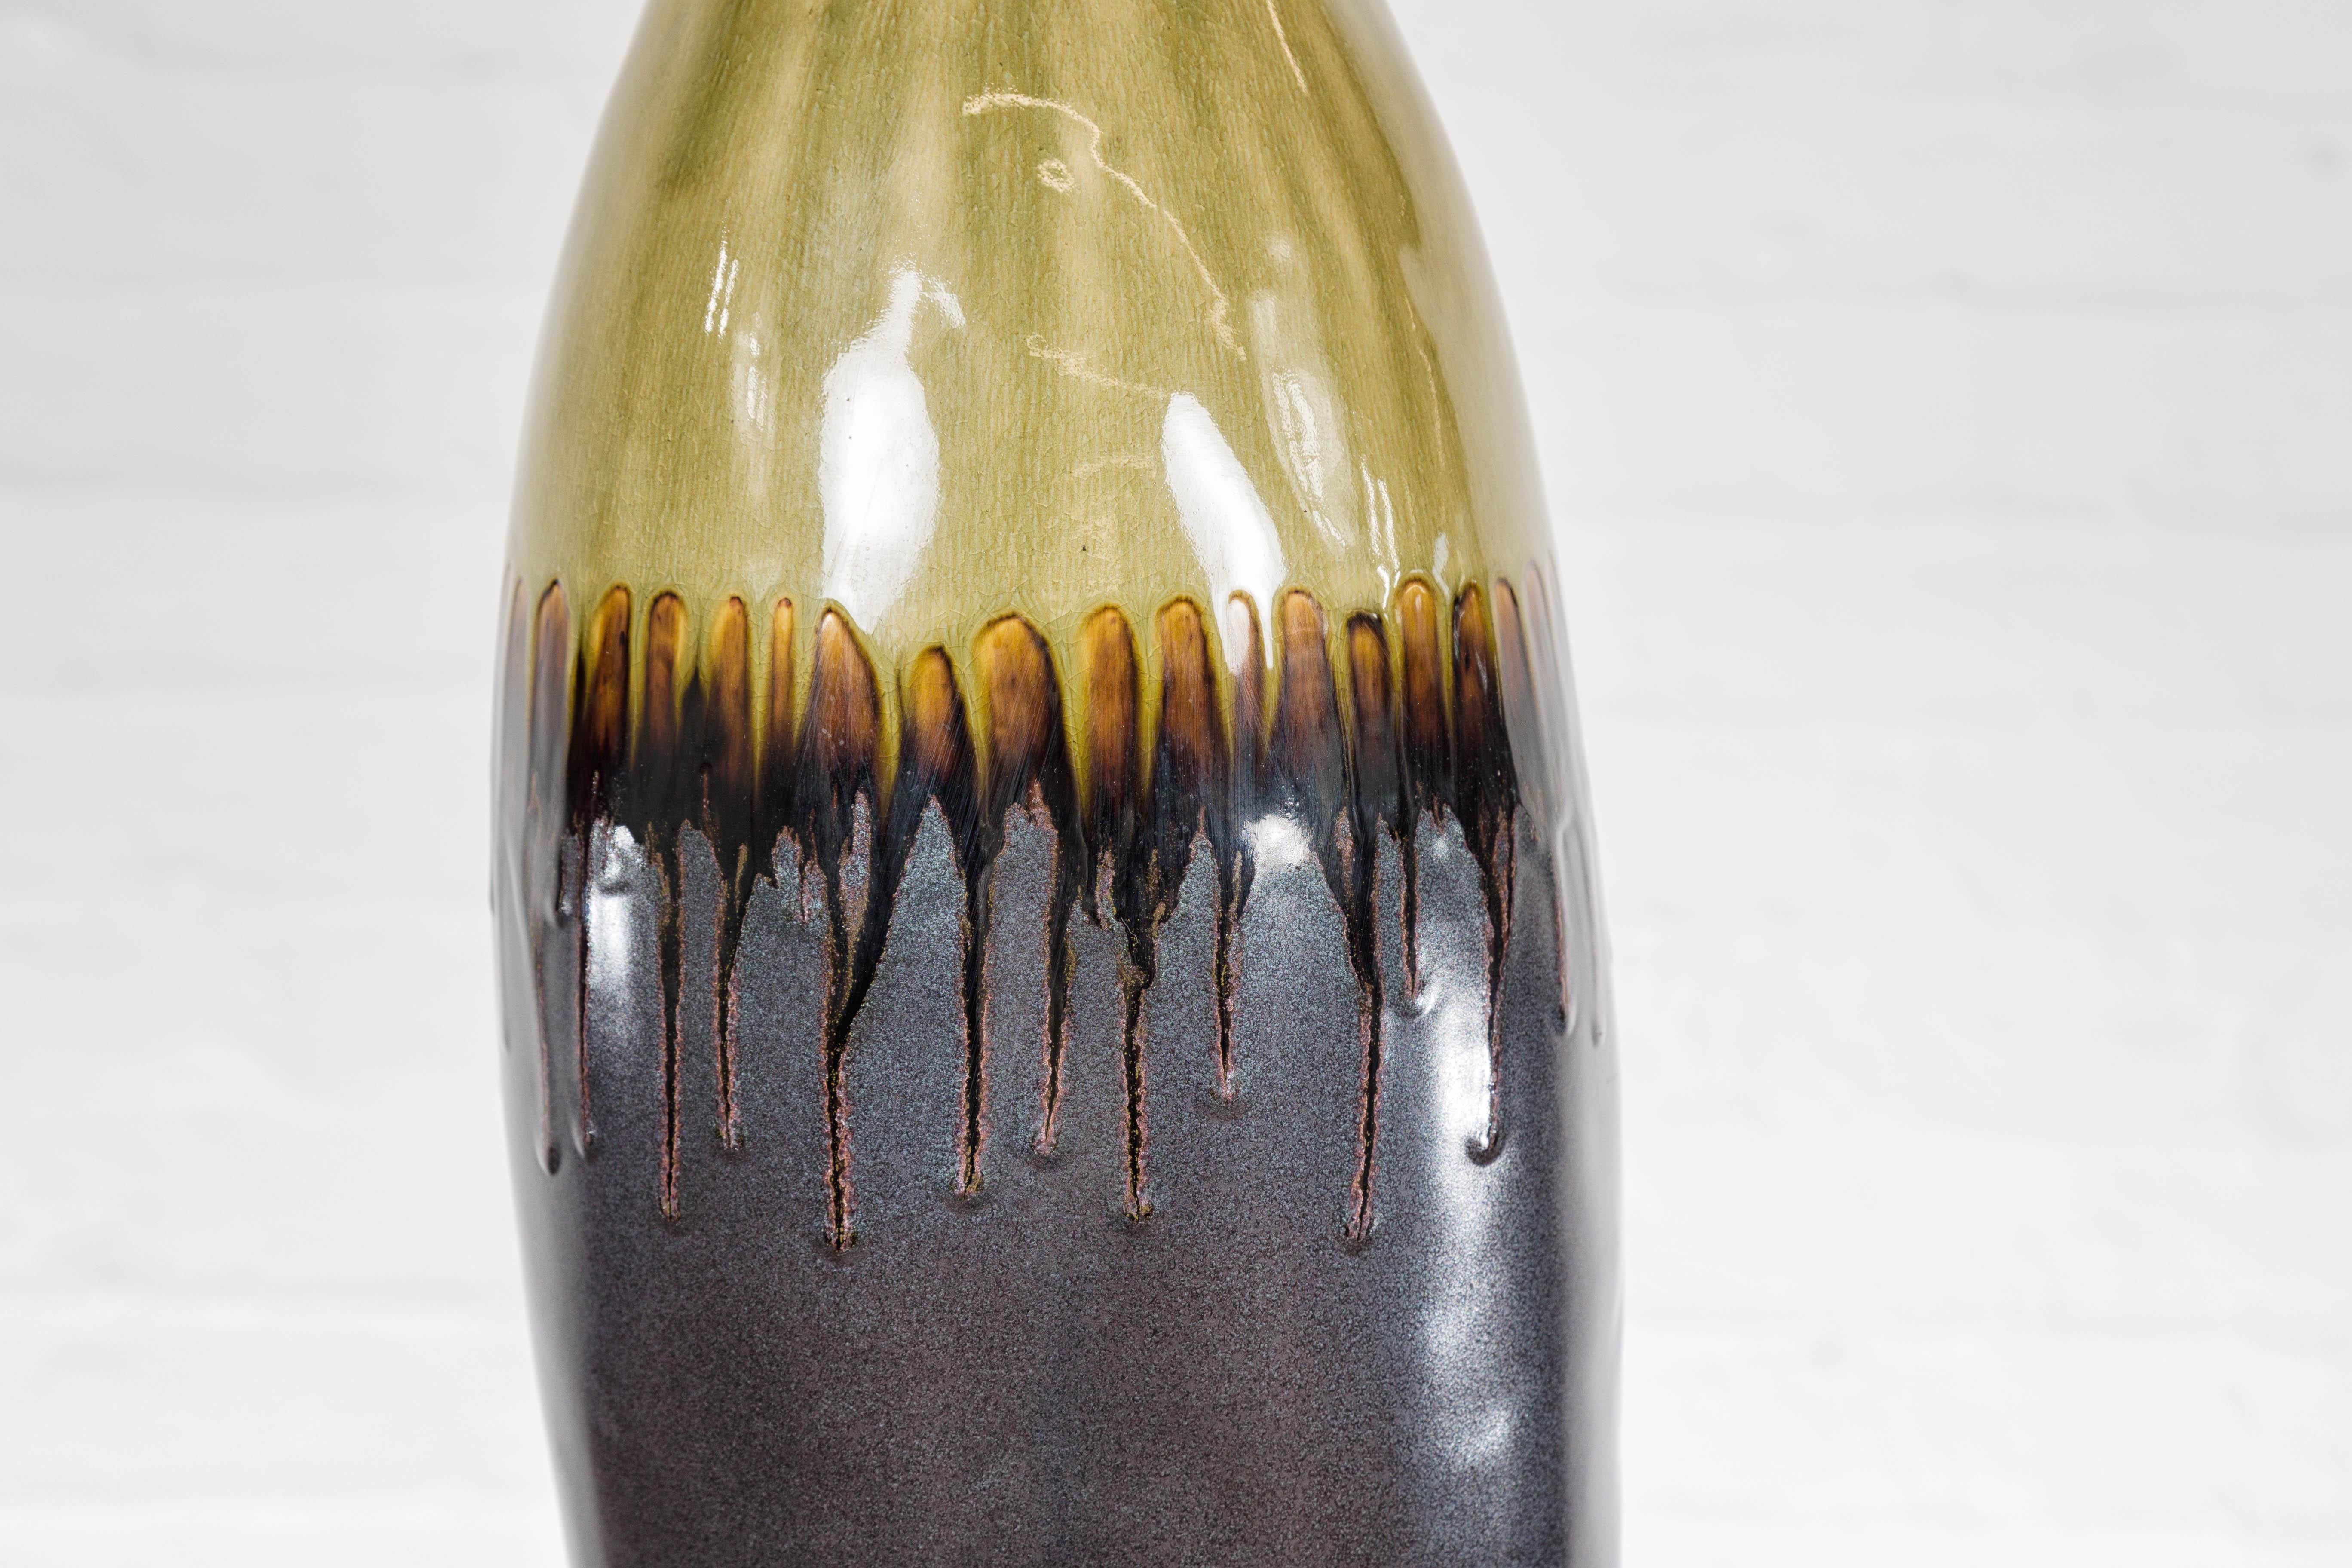 Handmade Artisan Ceramic Vase with Olive Green, Dark Grey and Brown Dripping For Sale 4